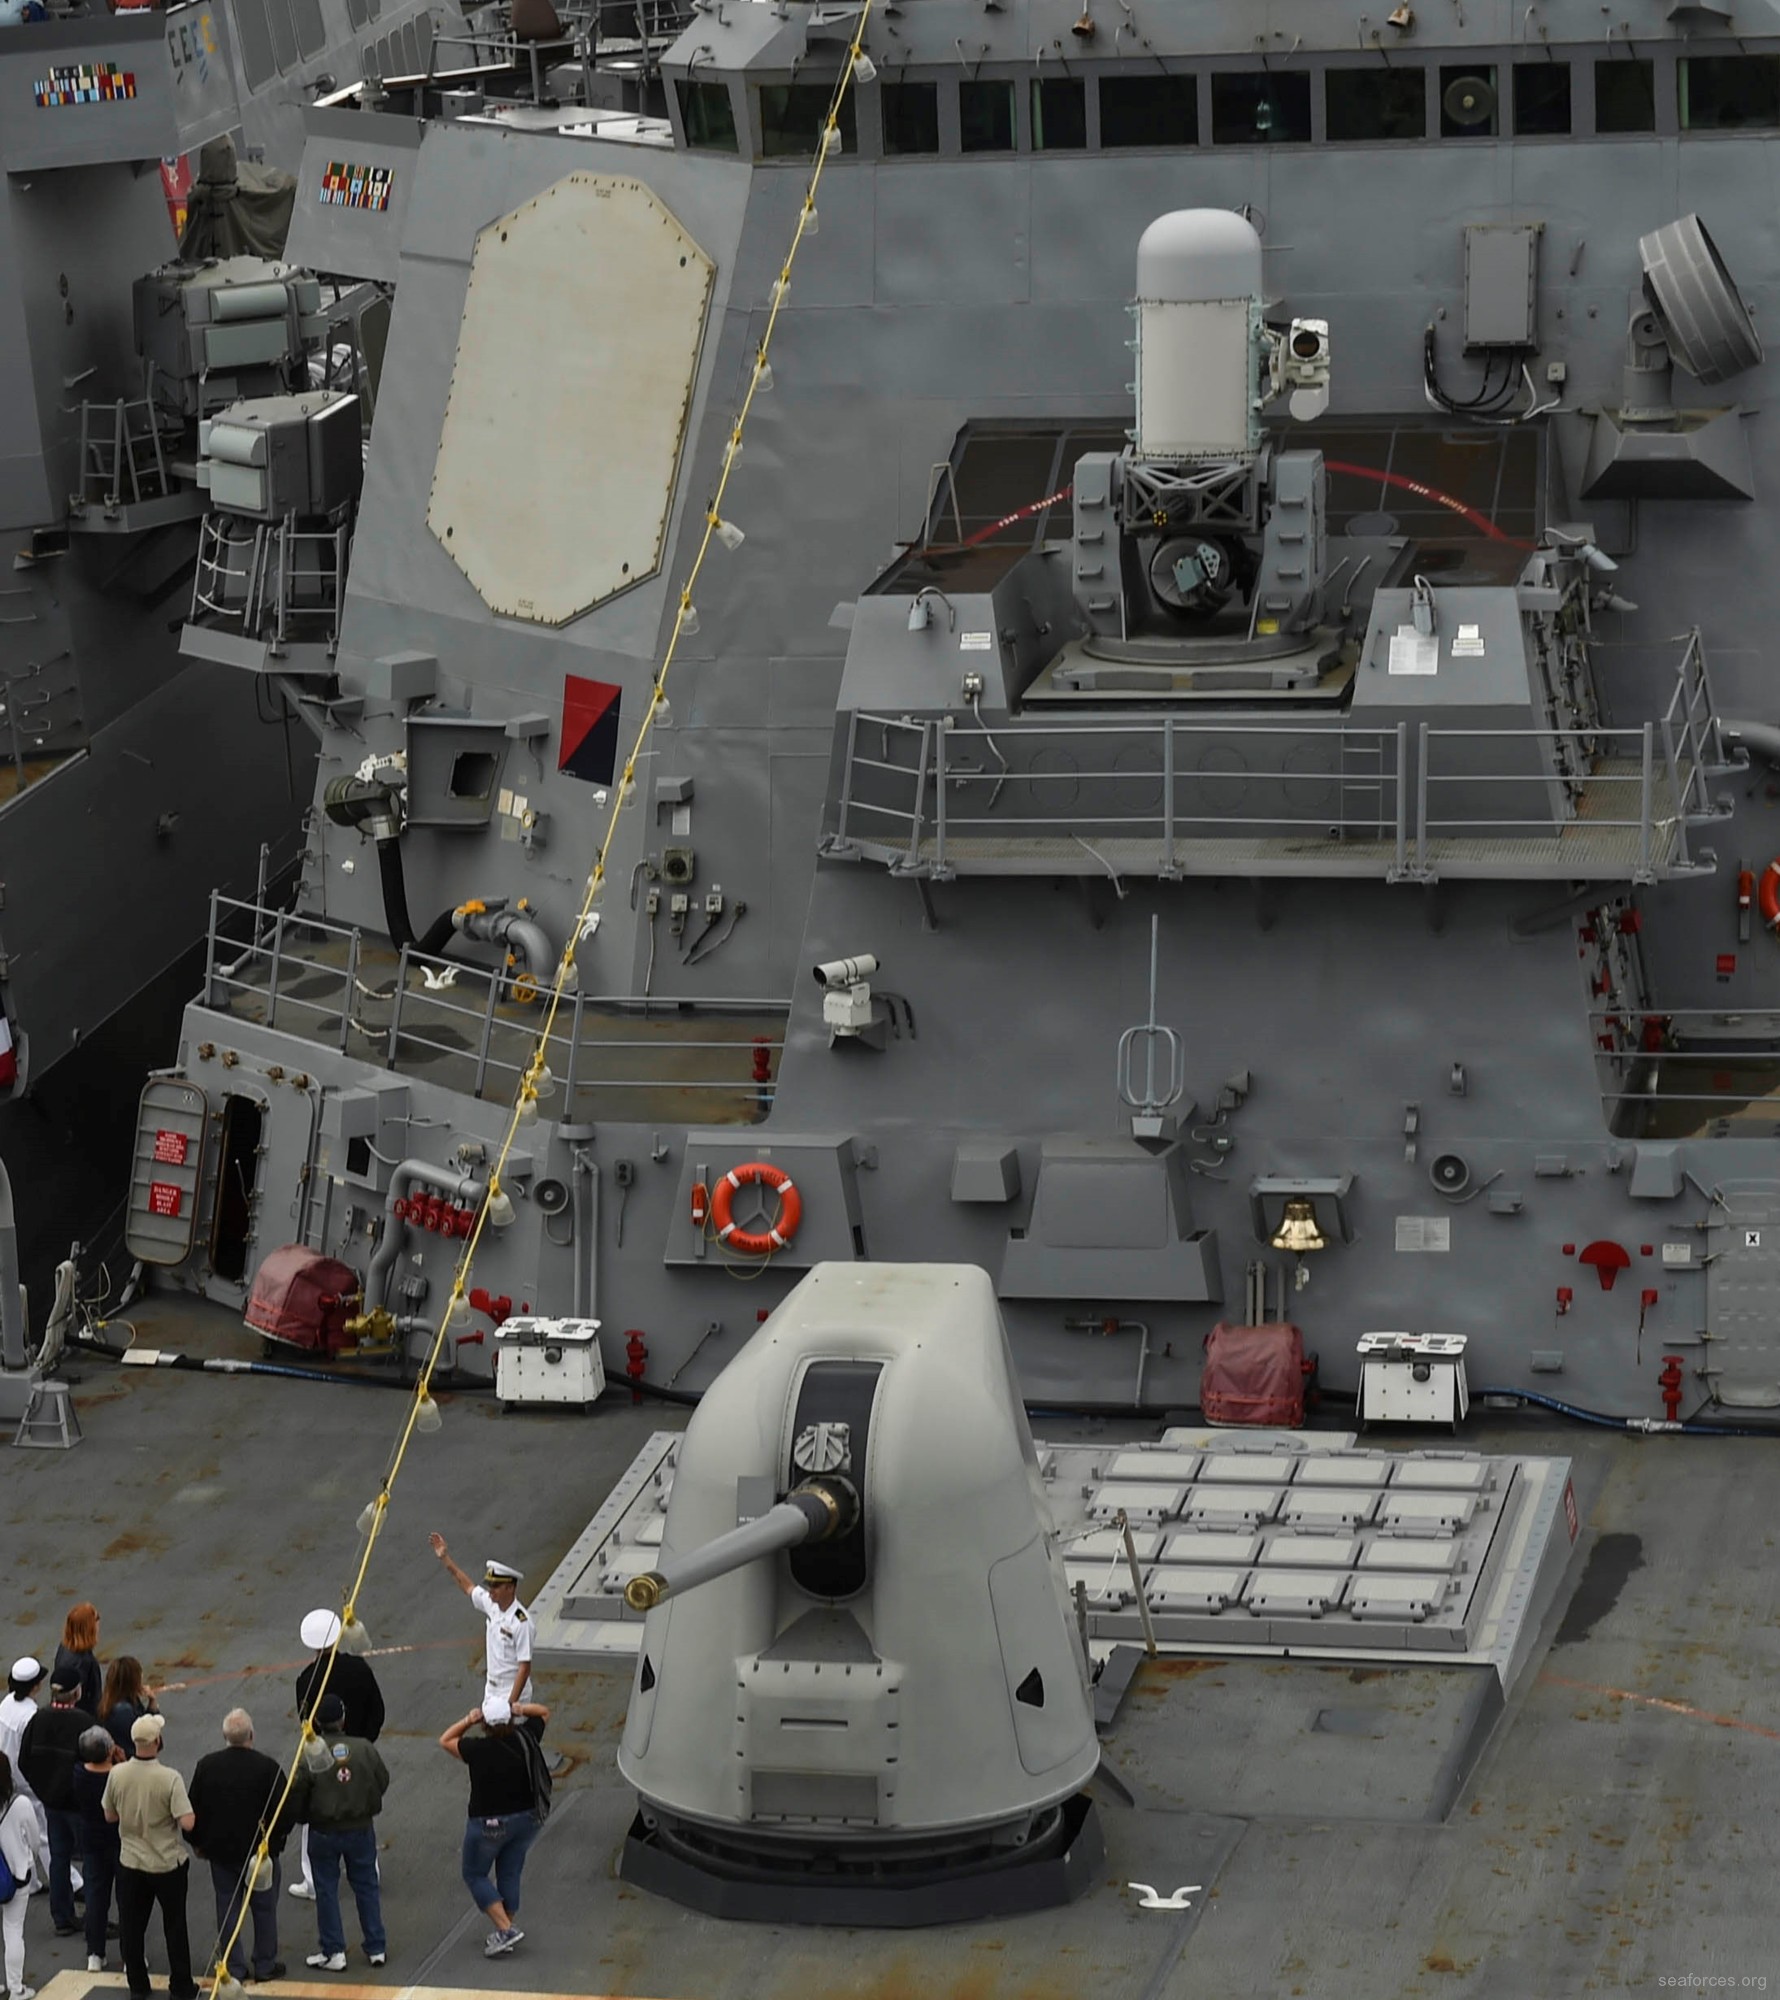 ddg-59 uss russell guided missile destroyer us navy 03 aegis an/spy-1d radar